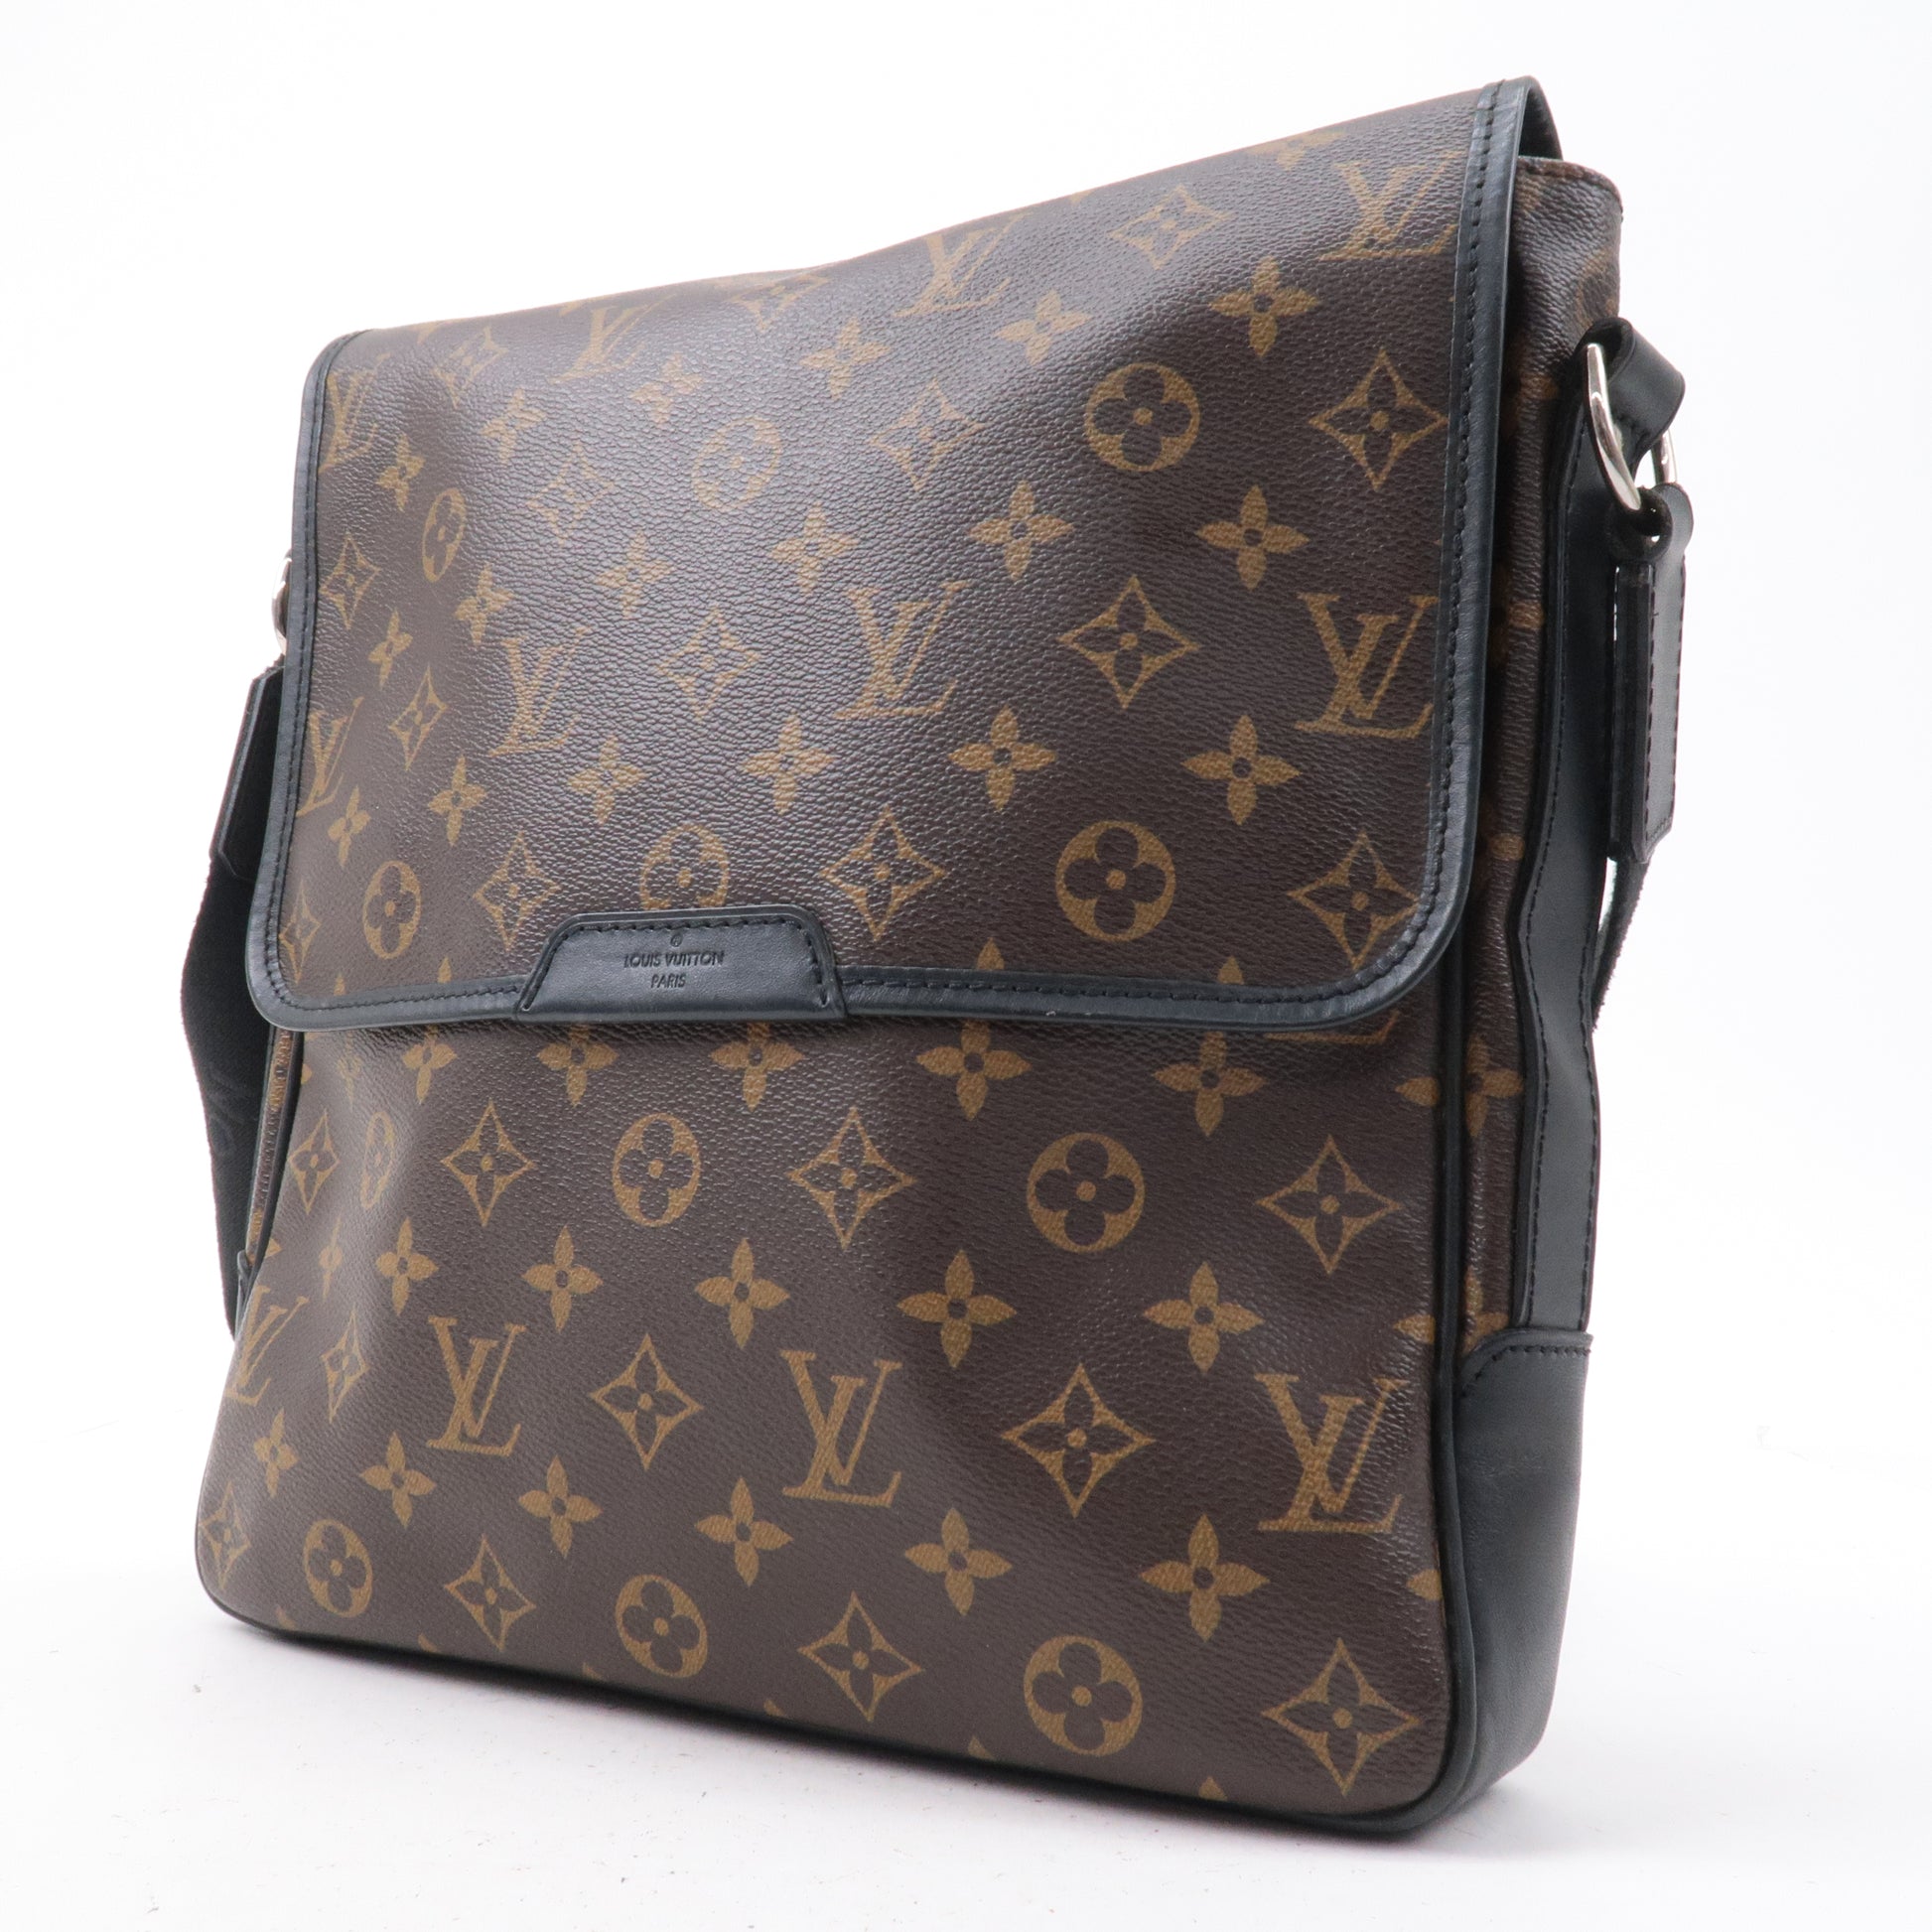 Buy Free Shipping [Used] LOUIS VUITTON Shoulder Bag District PM Monogram  Macassar M40935 from Japan - Buy authentic Plus exclusive items from Japan